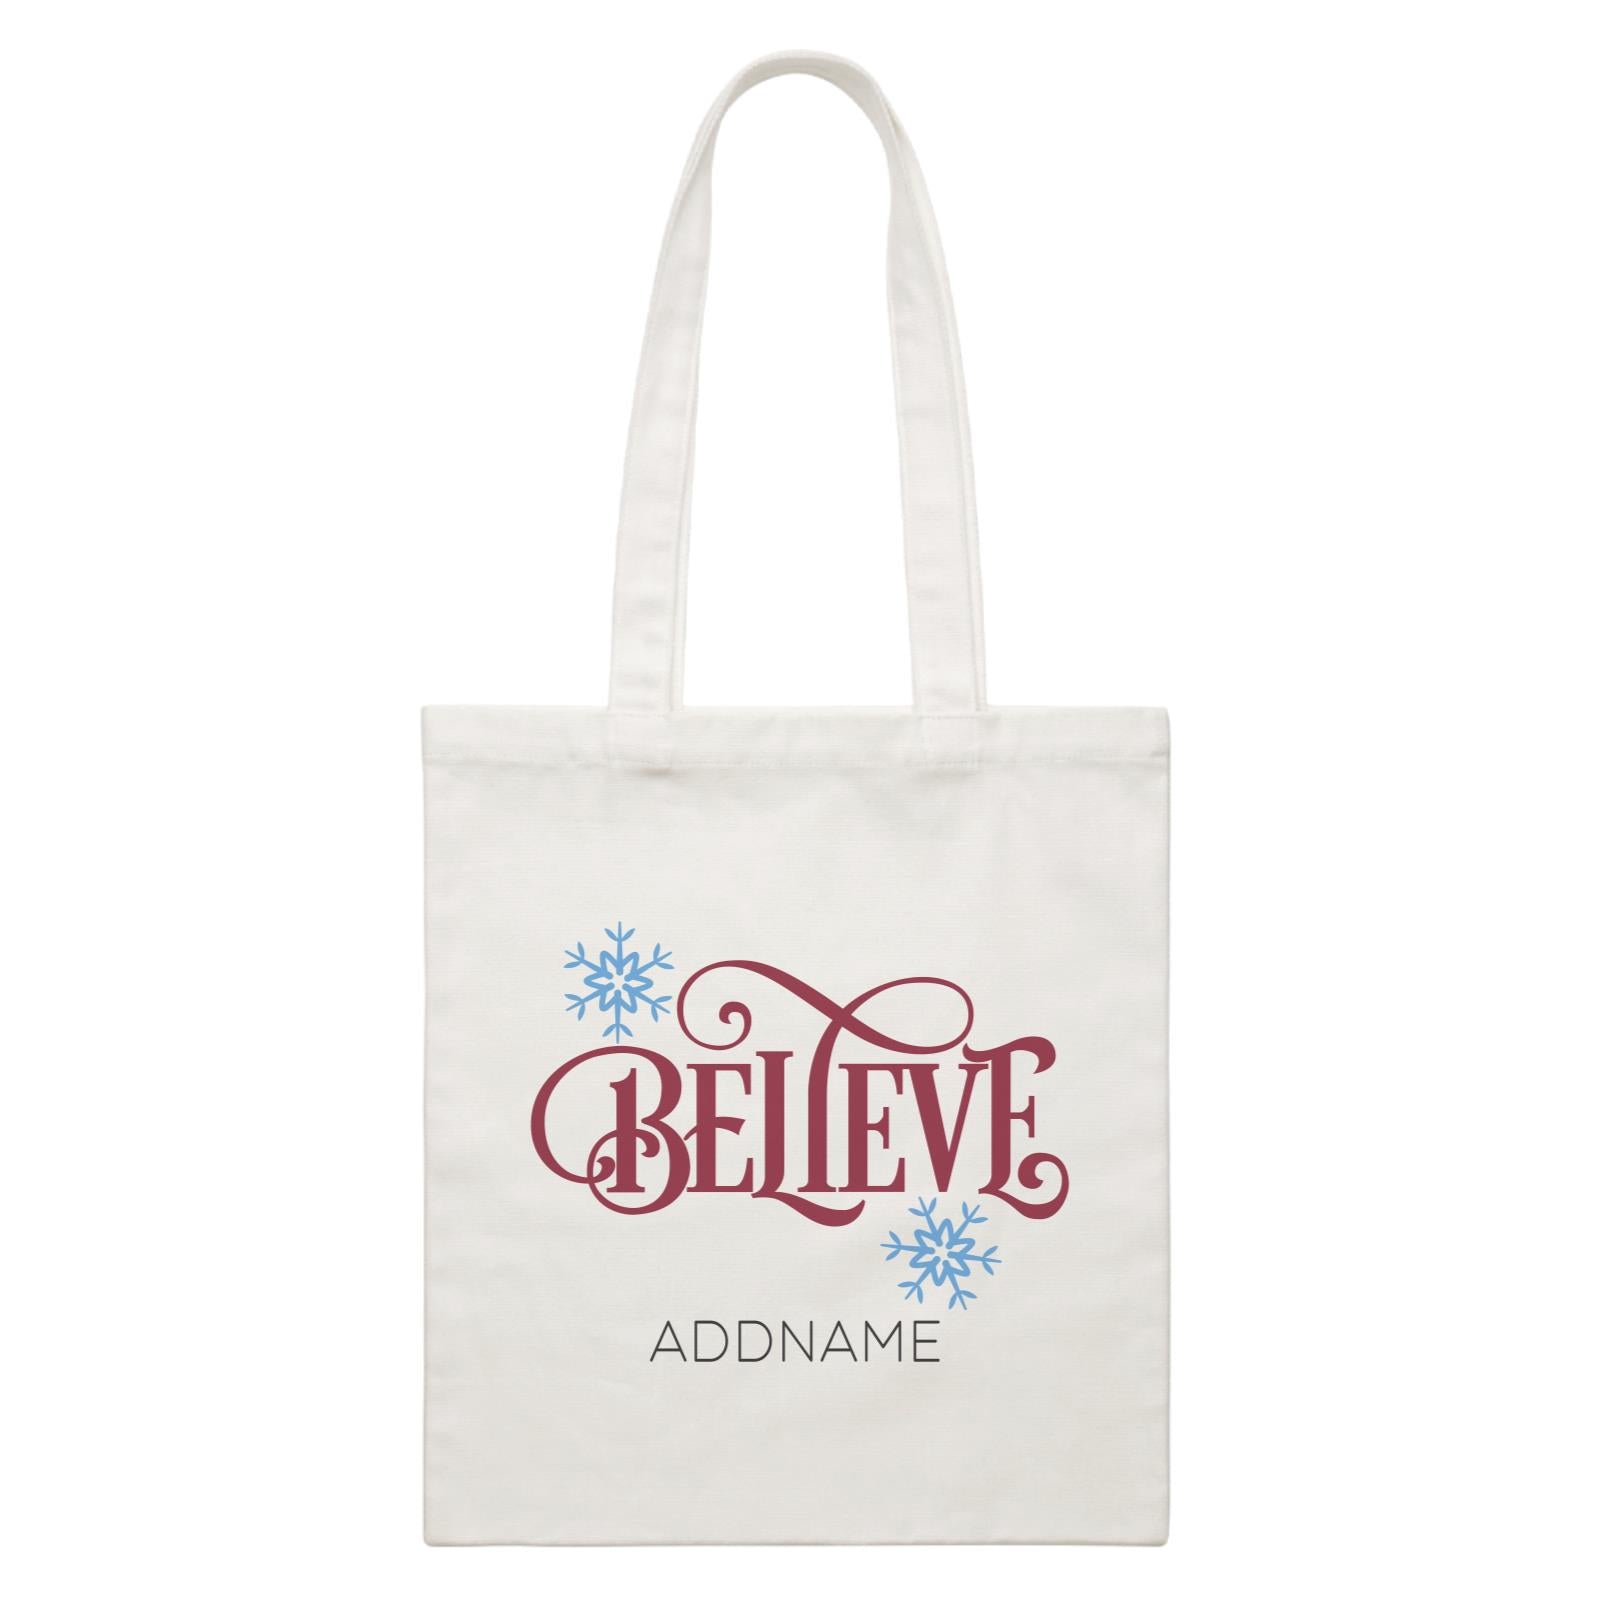 Xmas Believe with Snowflakes Canvas Bag